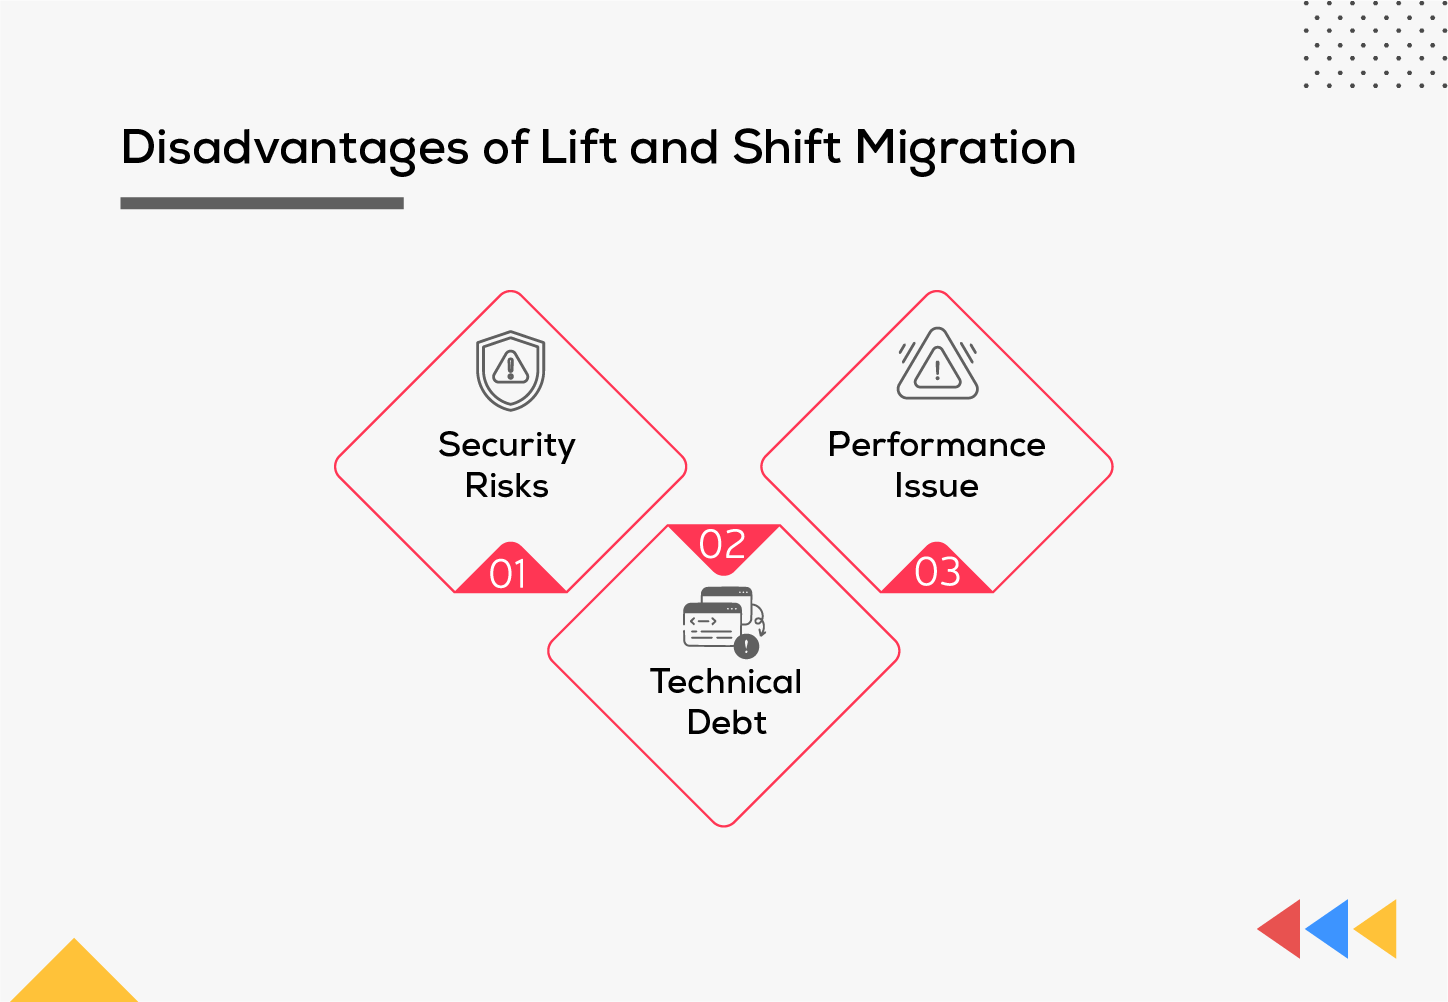 Disadvantages of Lift and Shift